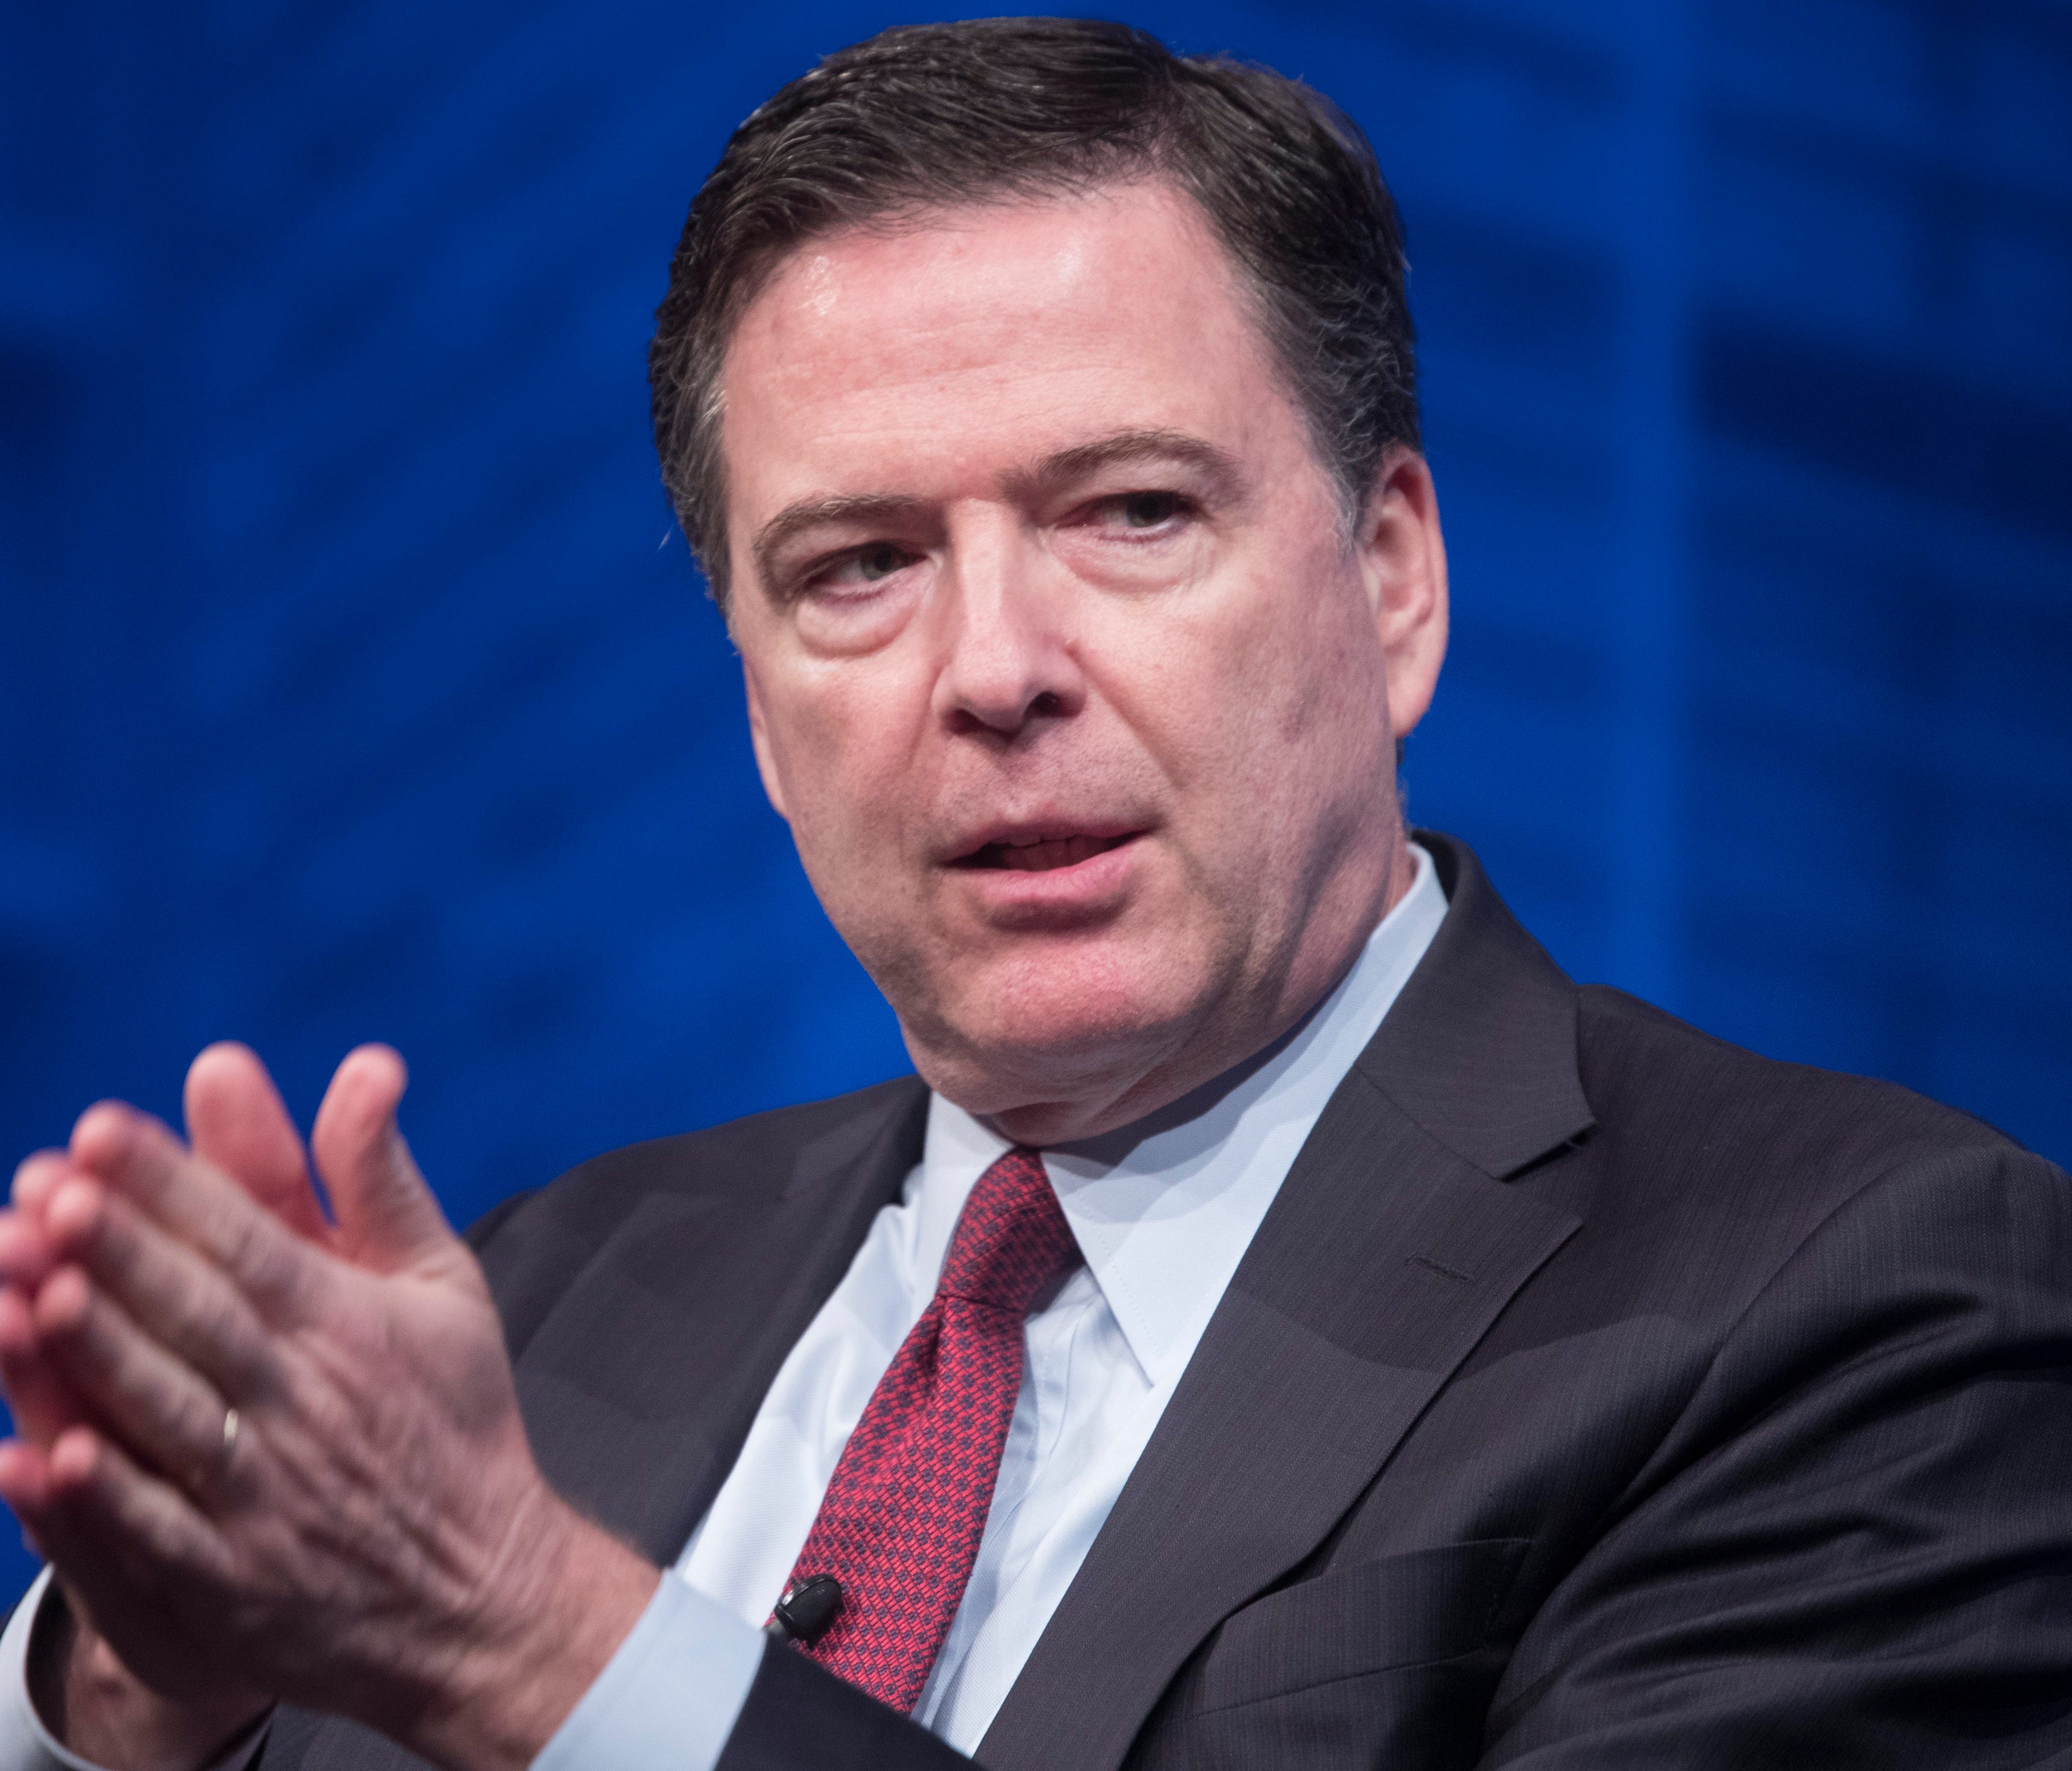 FBI Director James Comey is pictured speaking at the TV screening of 